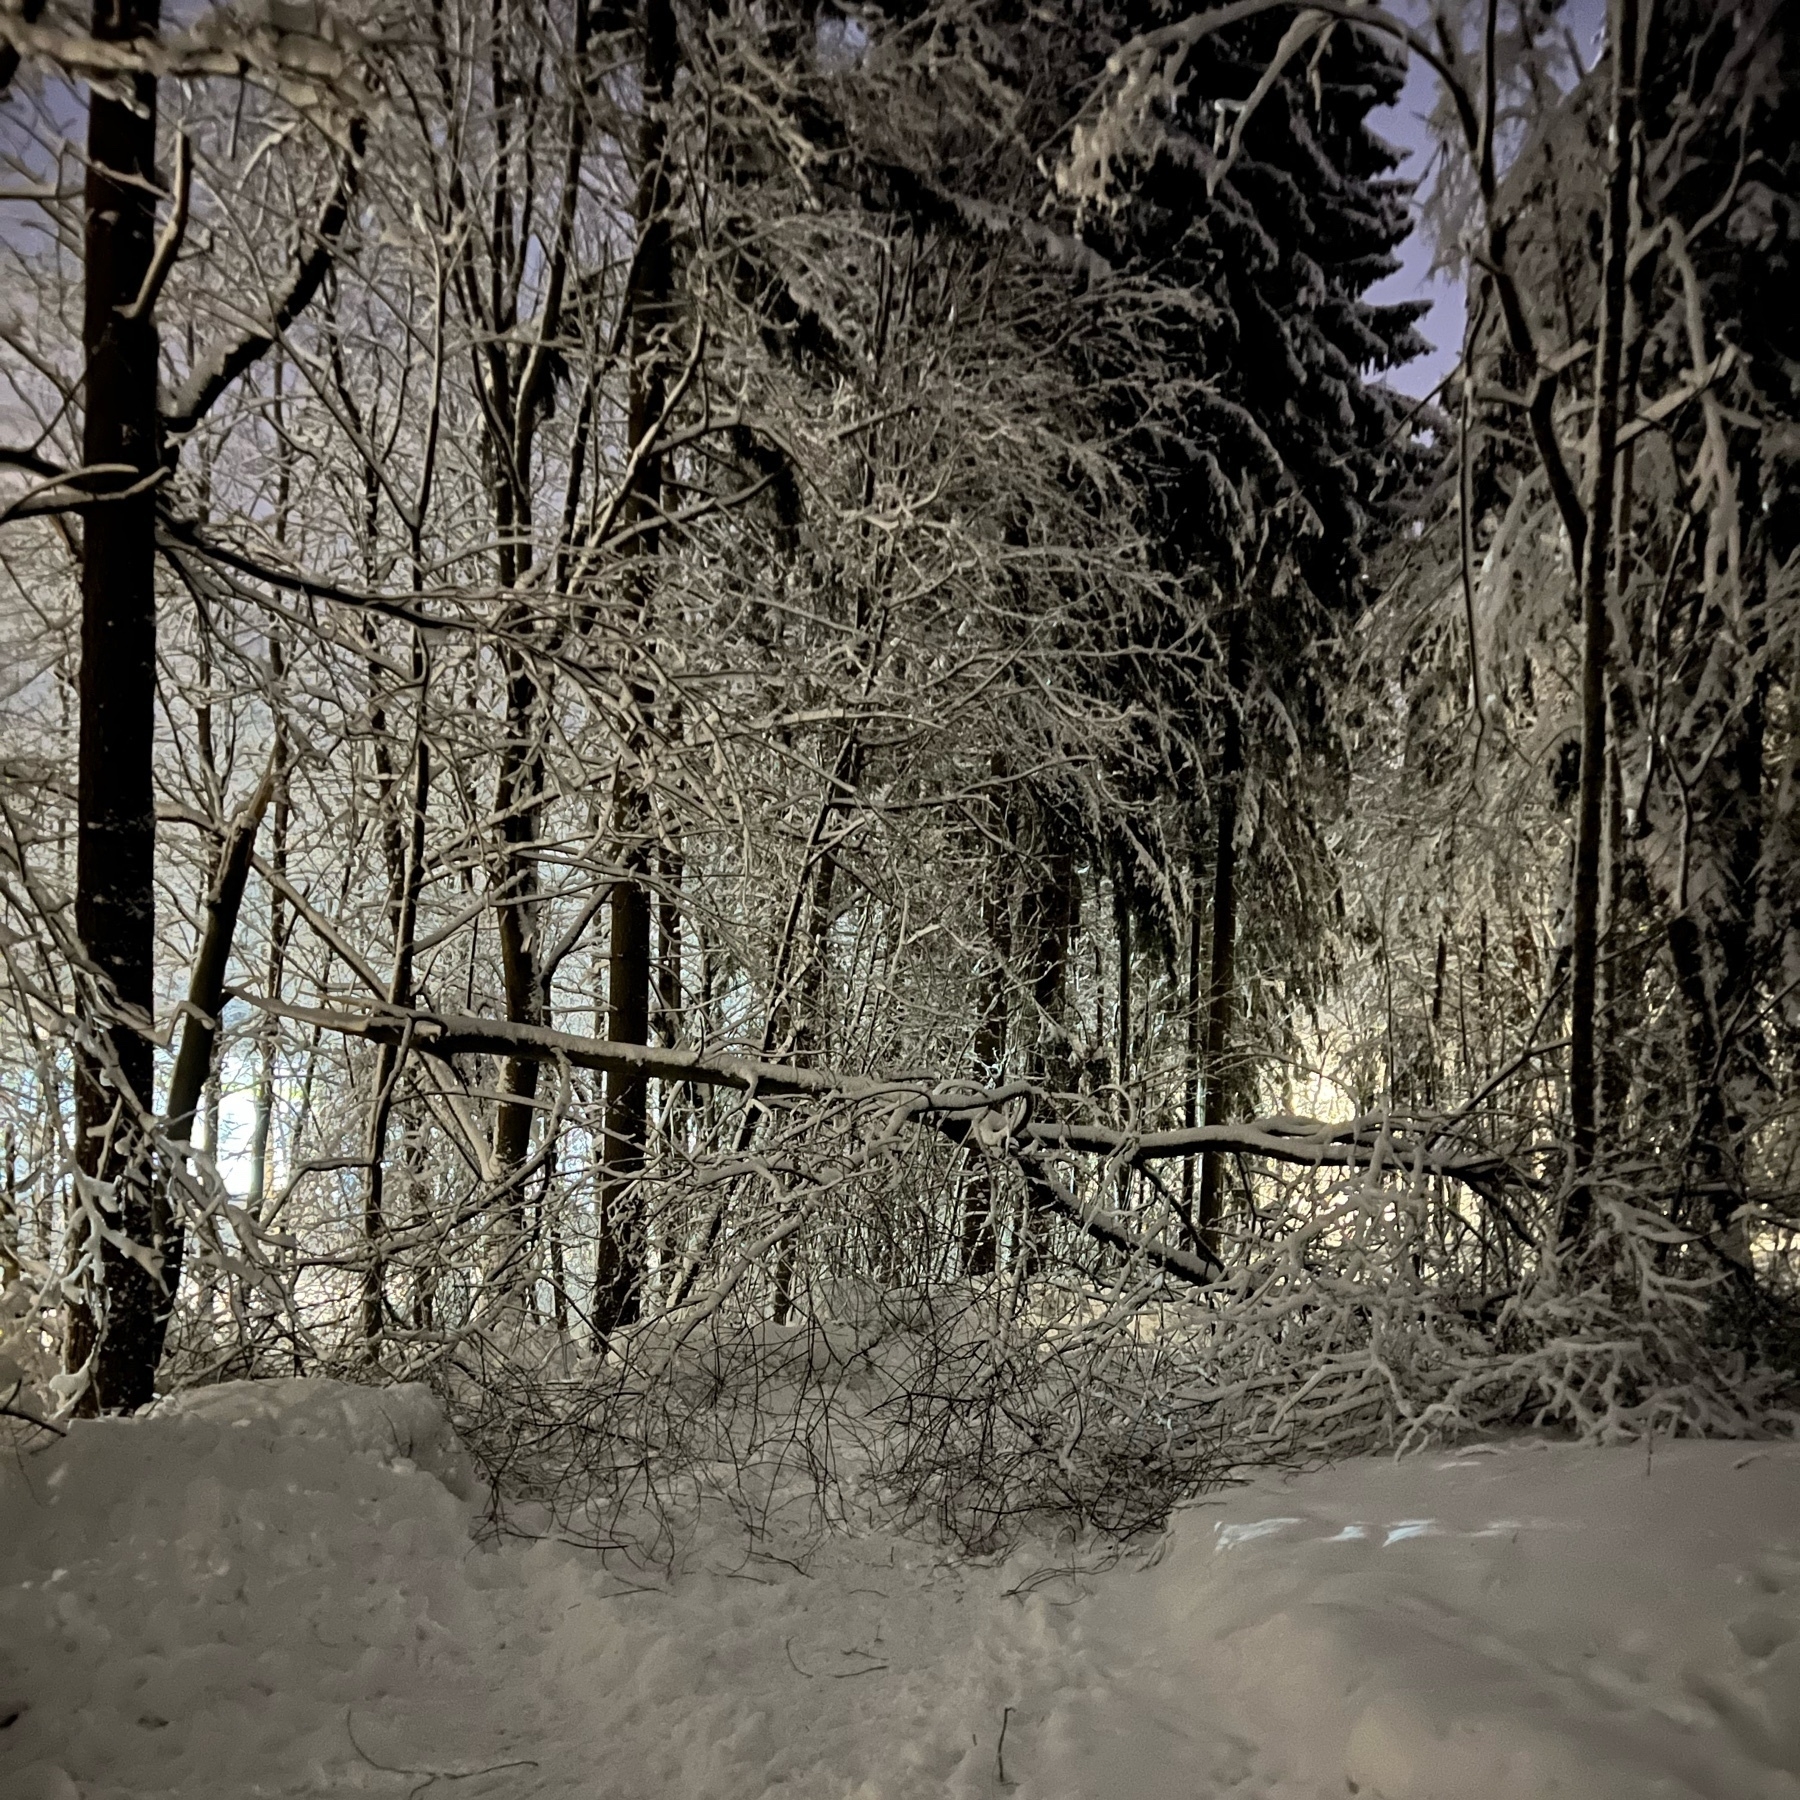 fallen tree over a snowy forest track